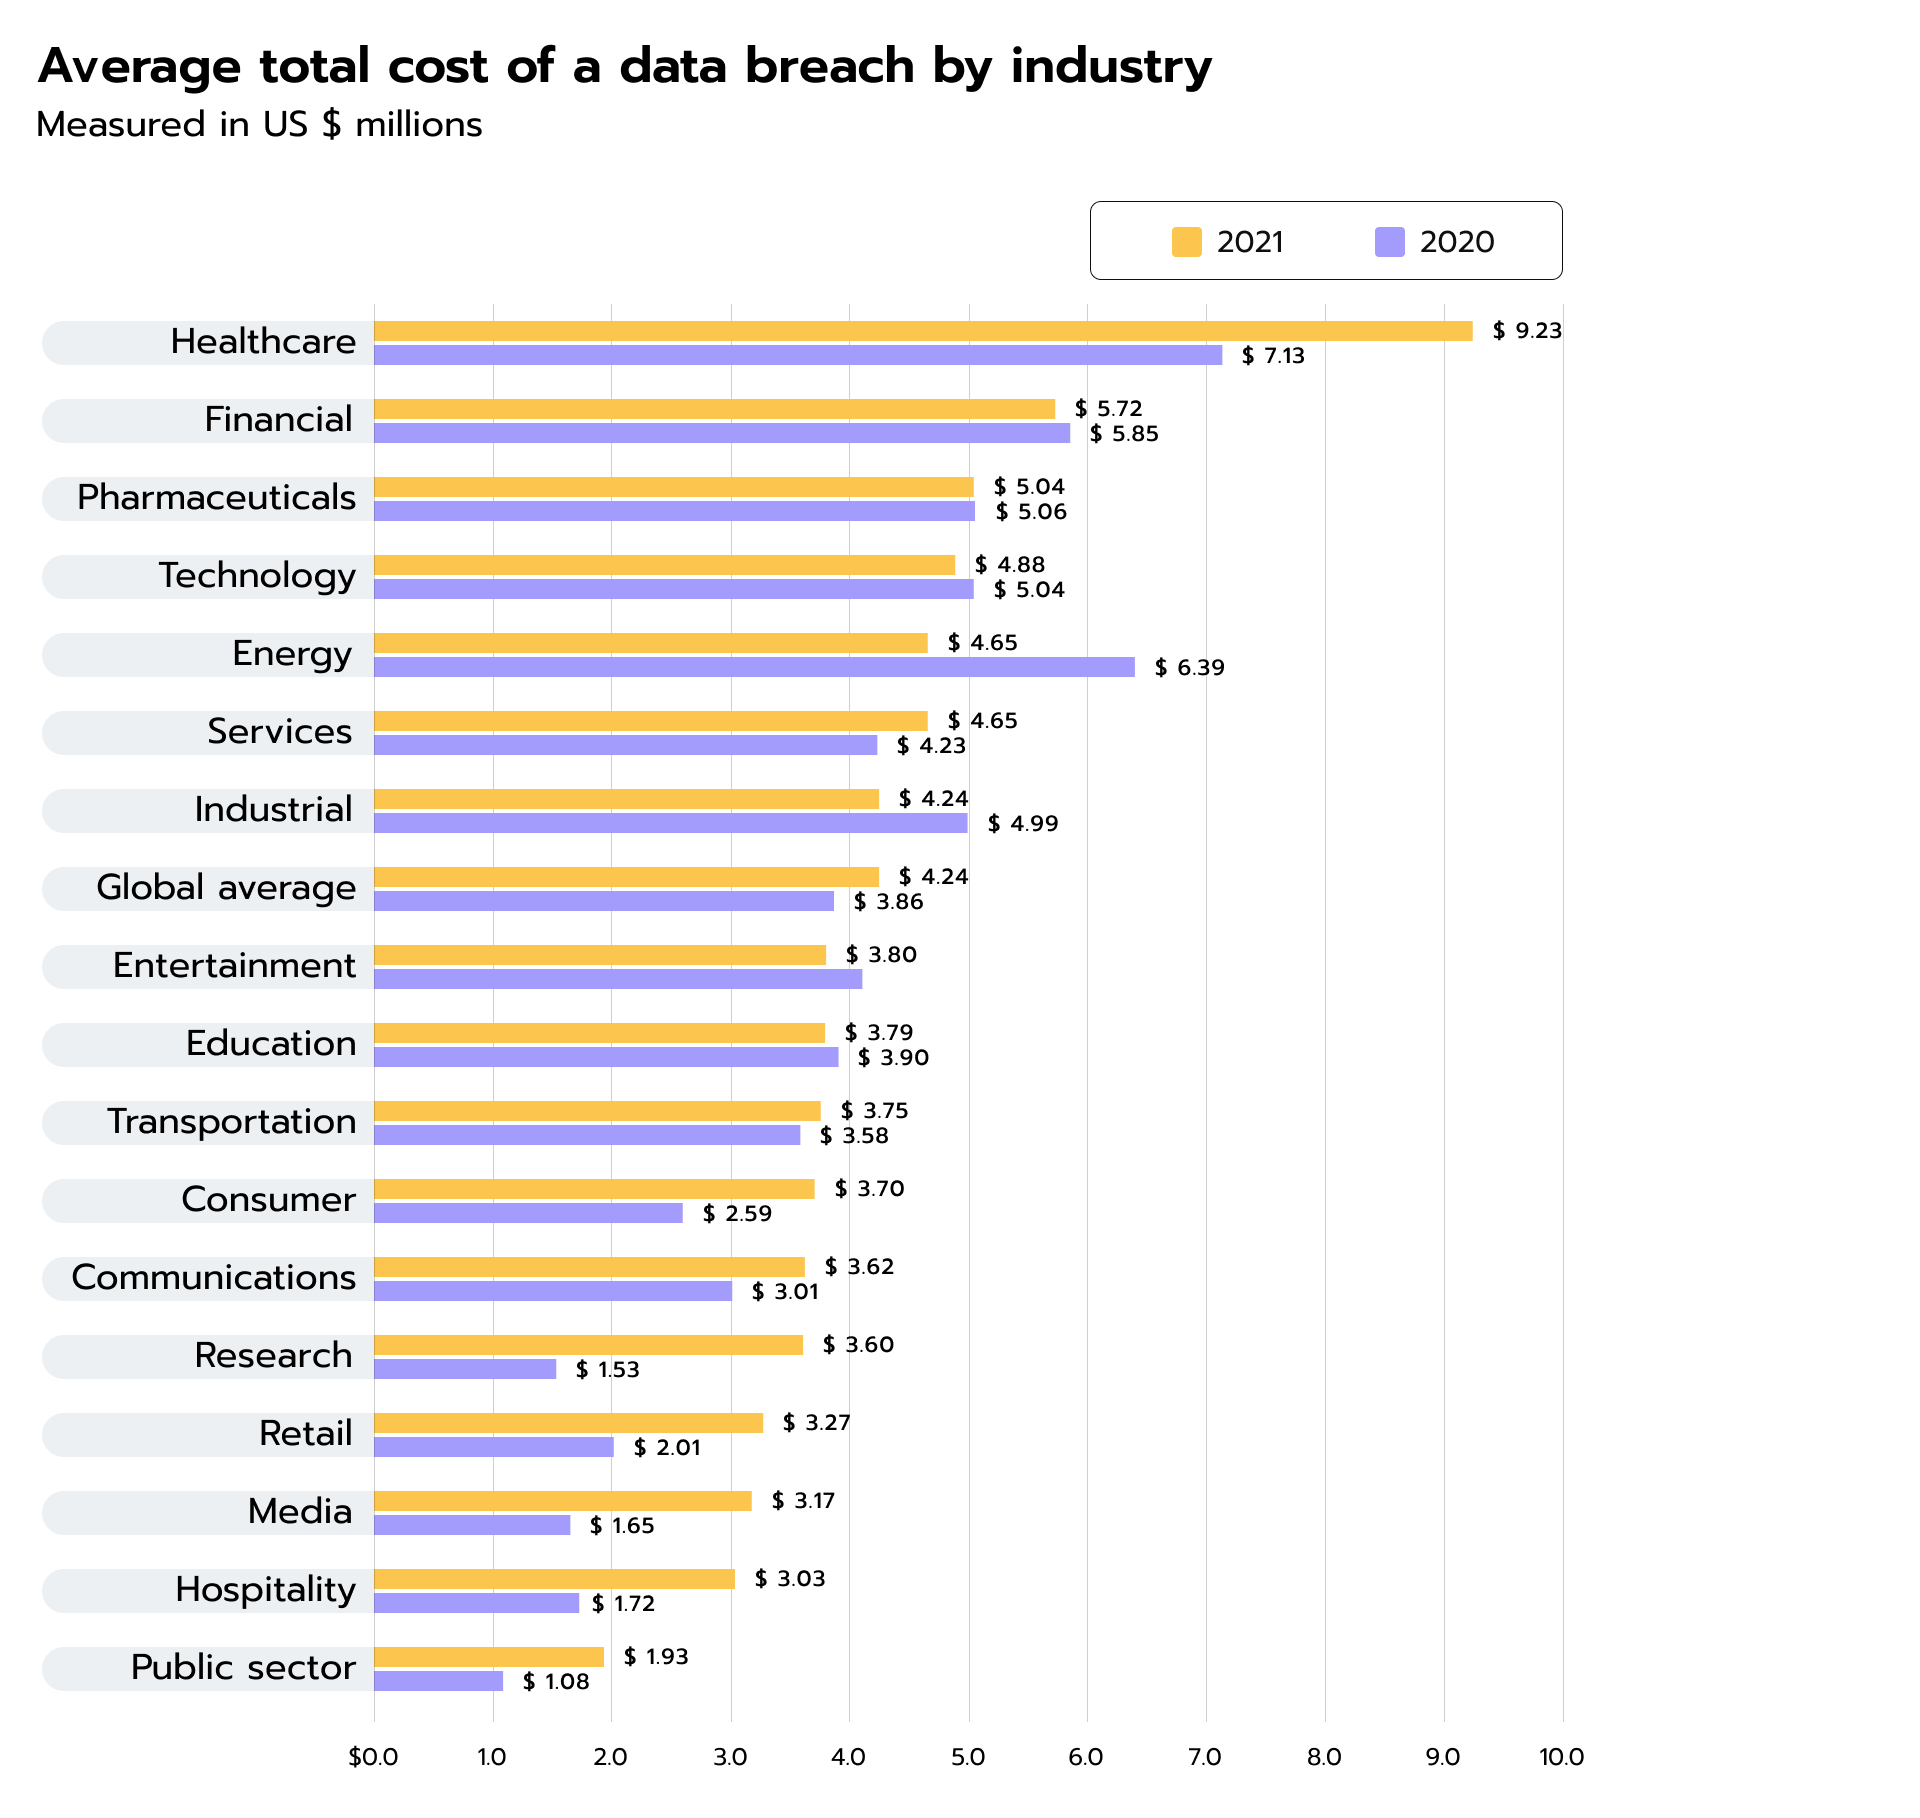 Average total cost of data breaches by industry in USD million